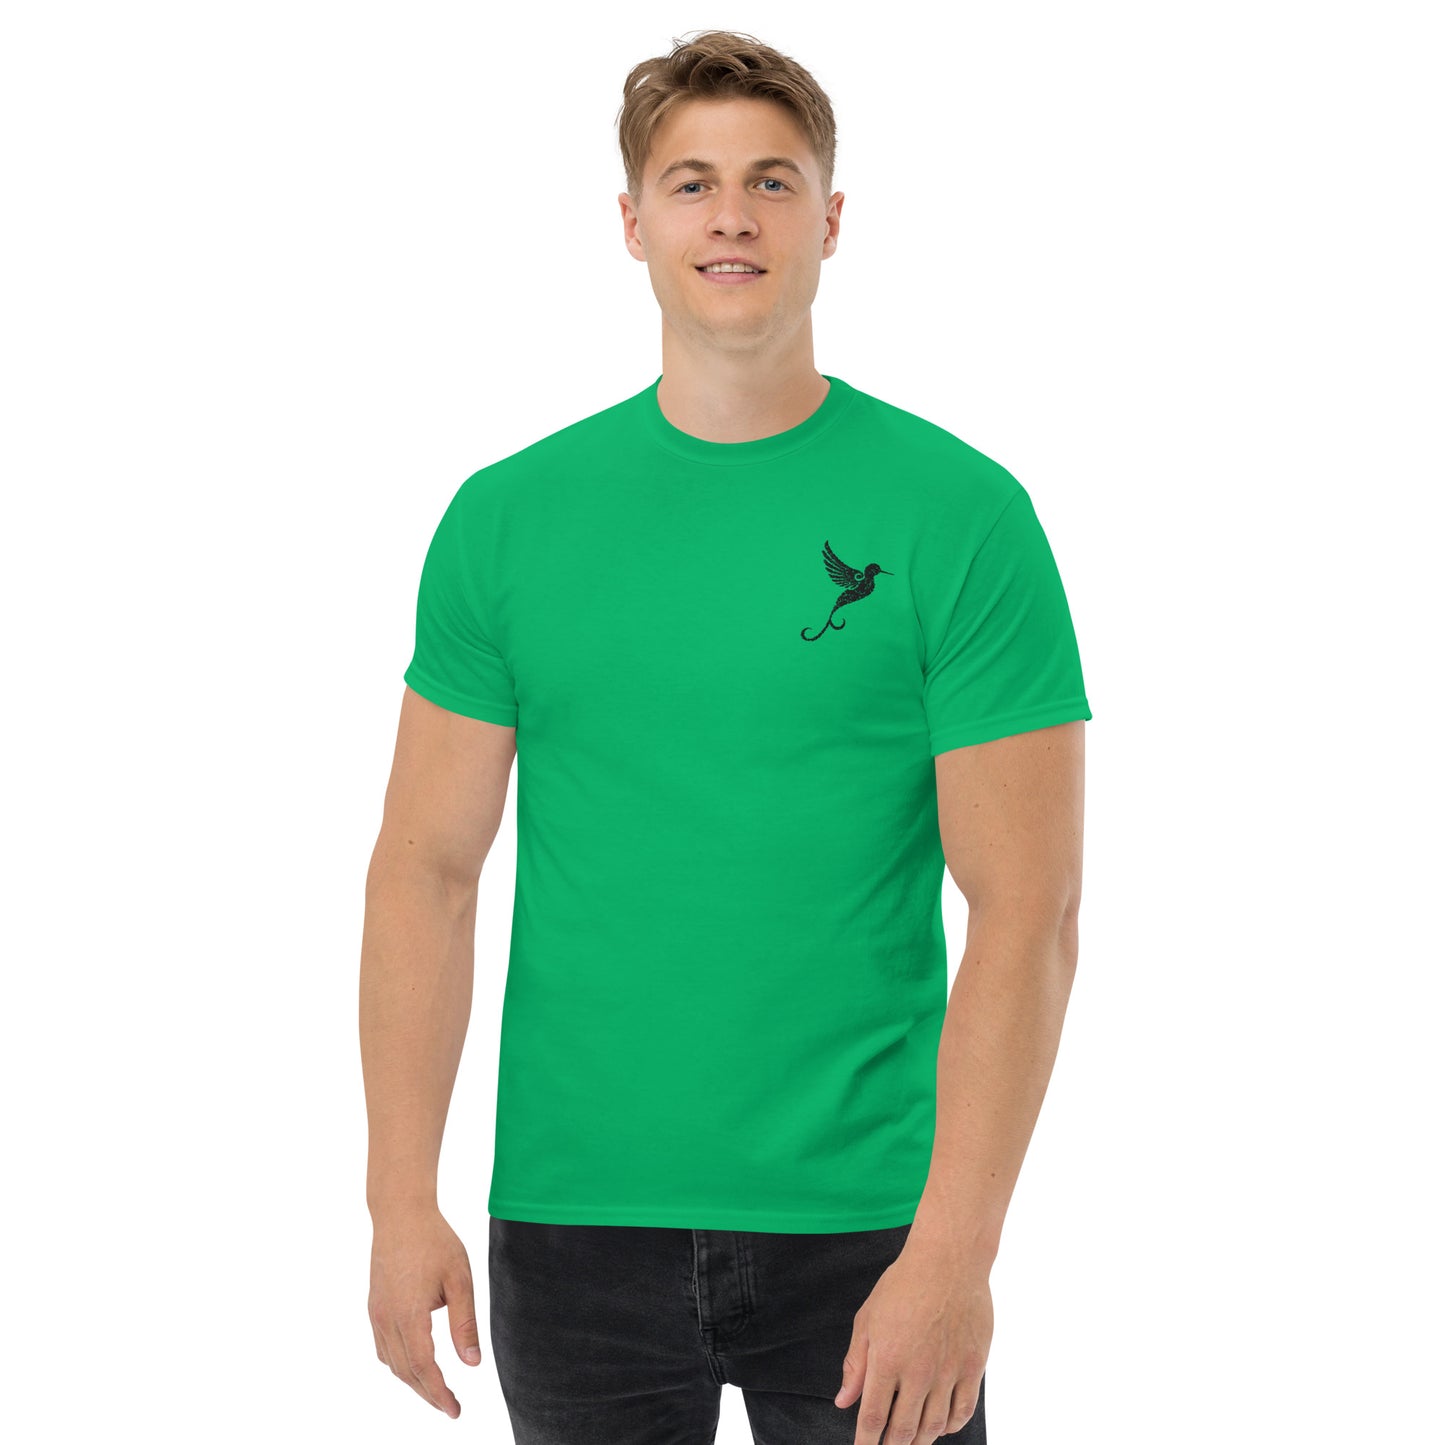 Ava Men's Embroidered T-shirt